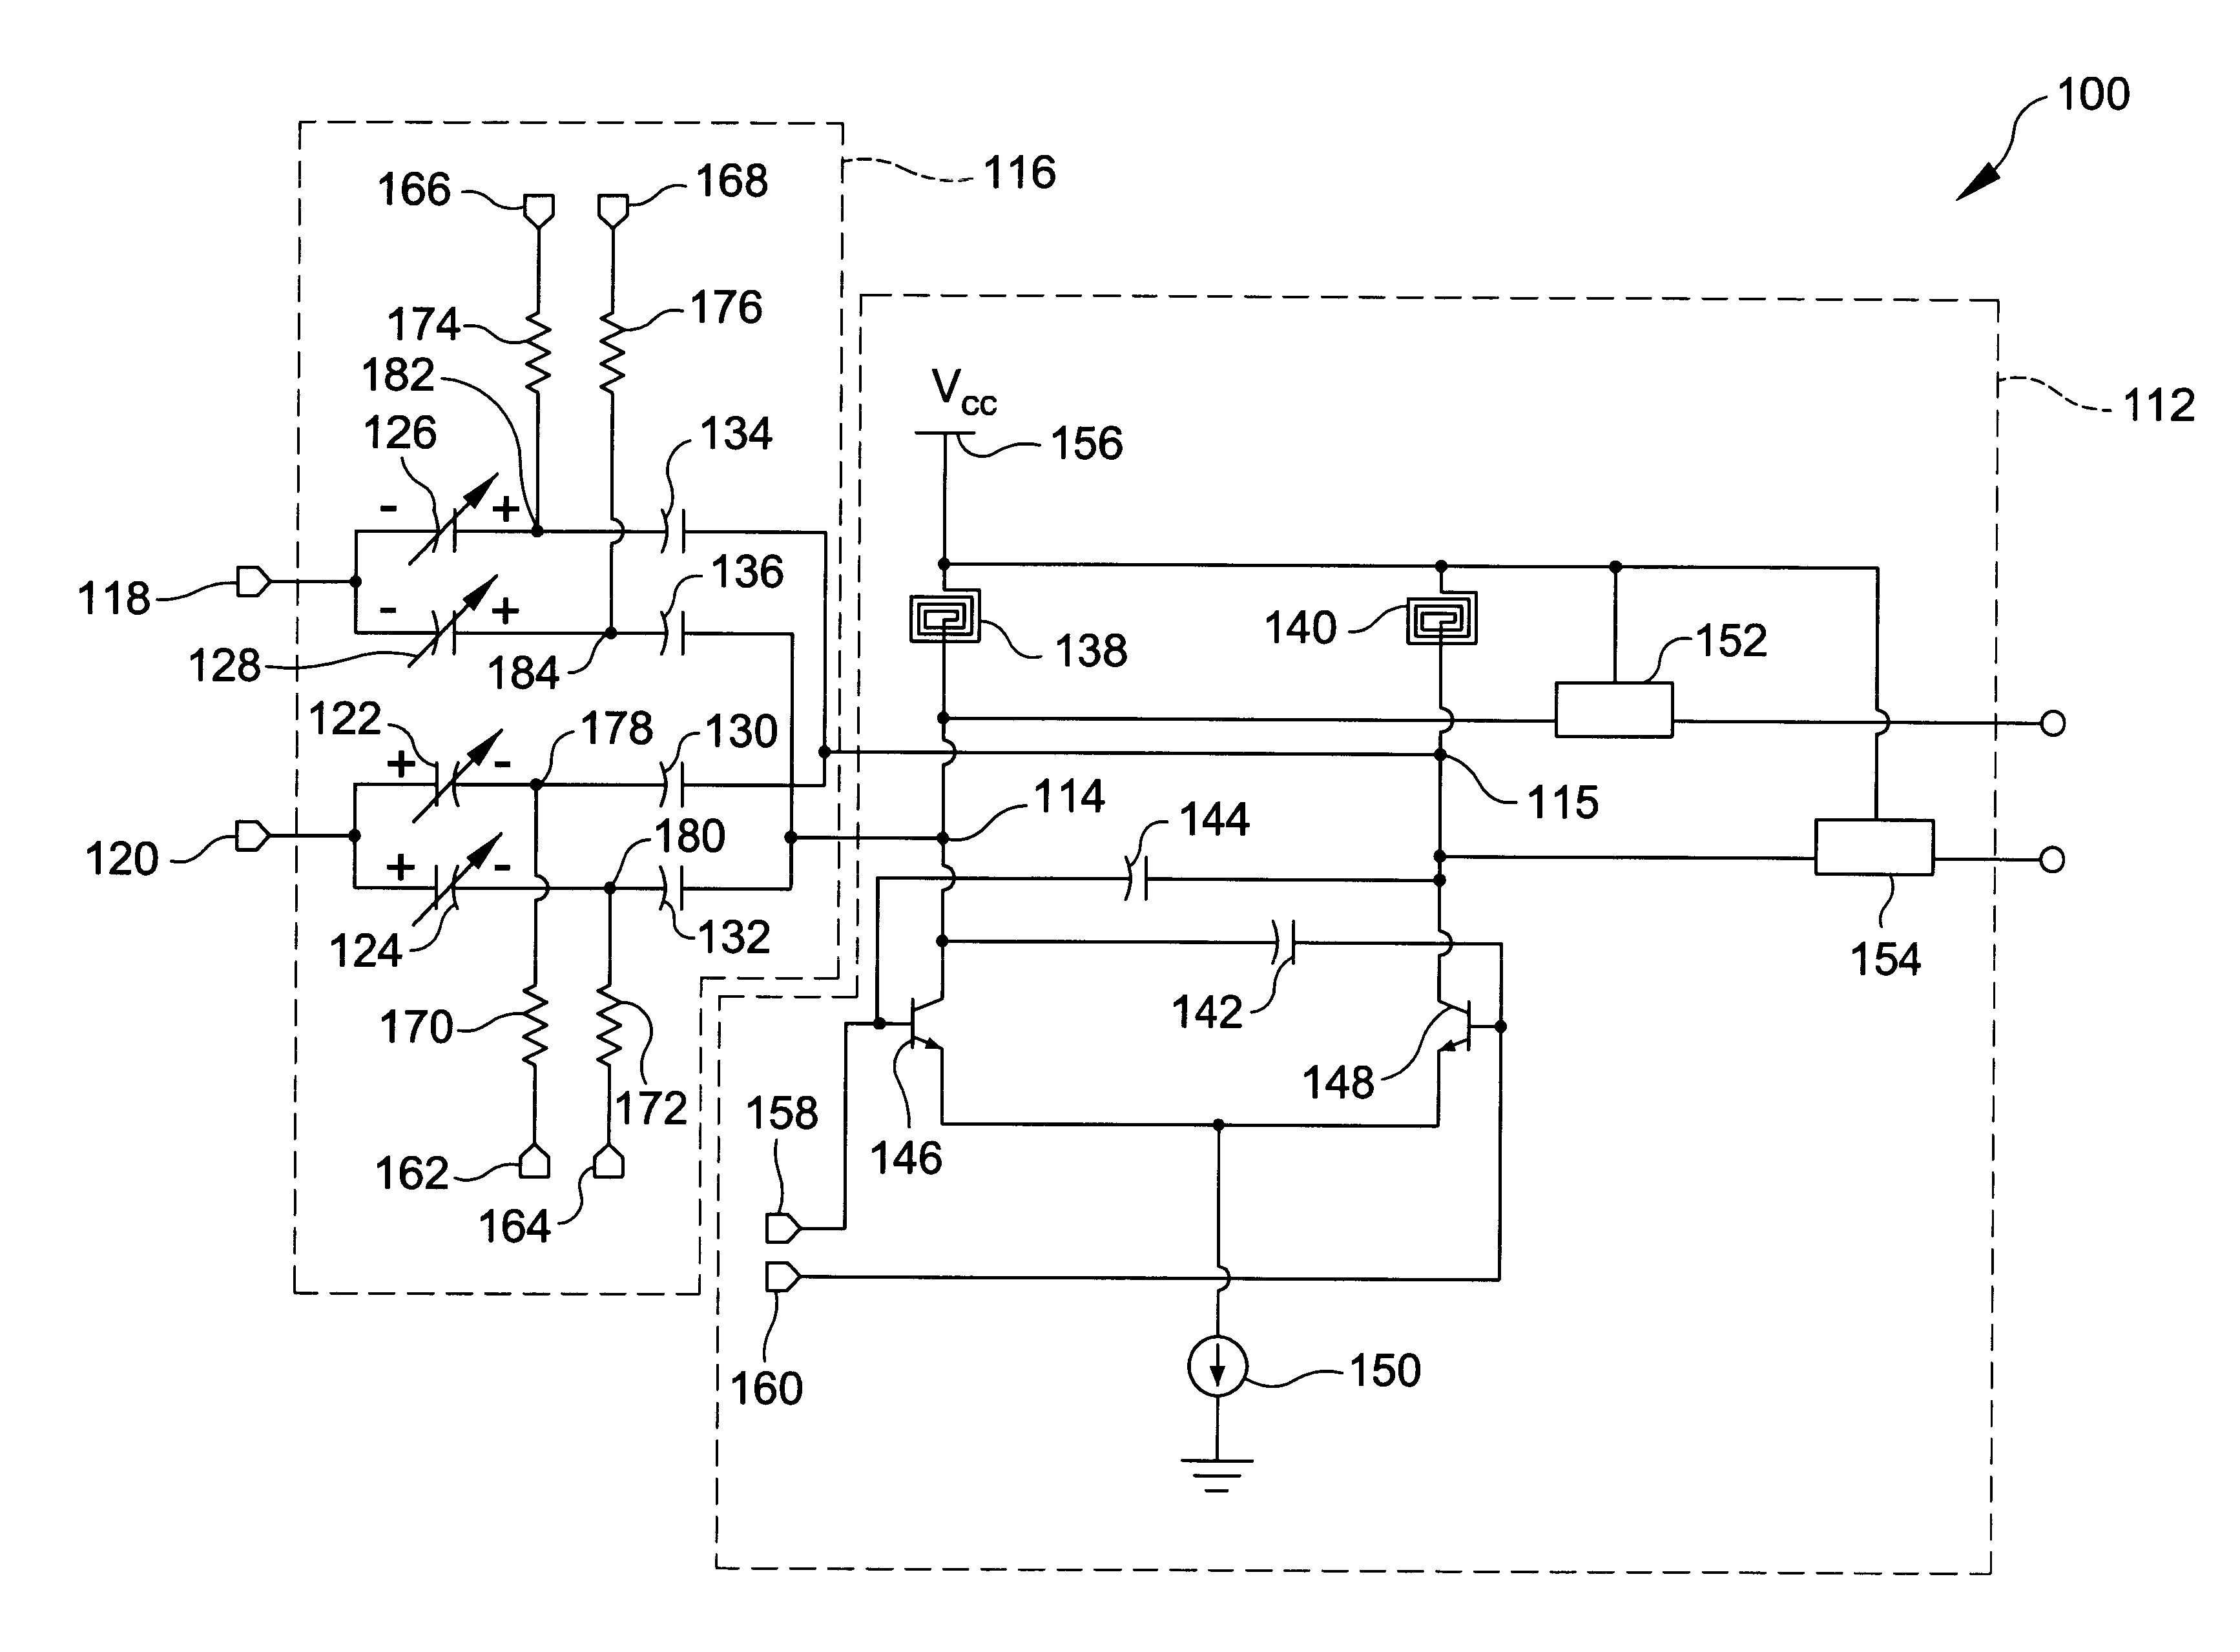 Differential control topology for LC VCO